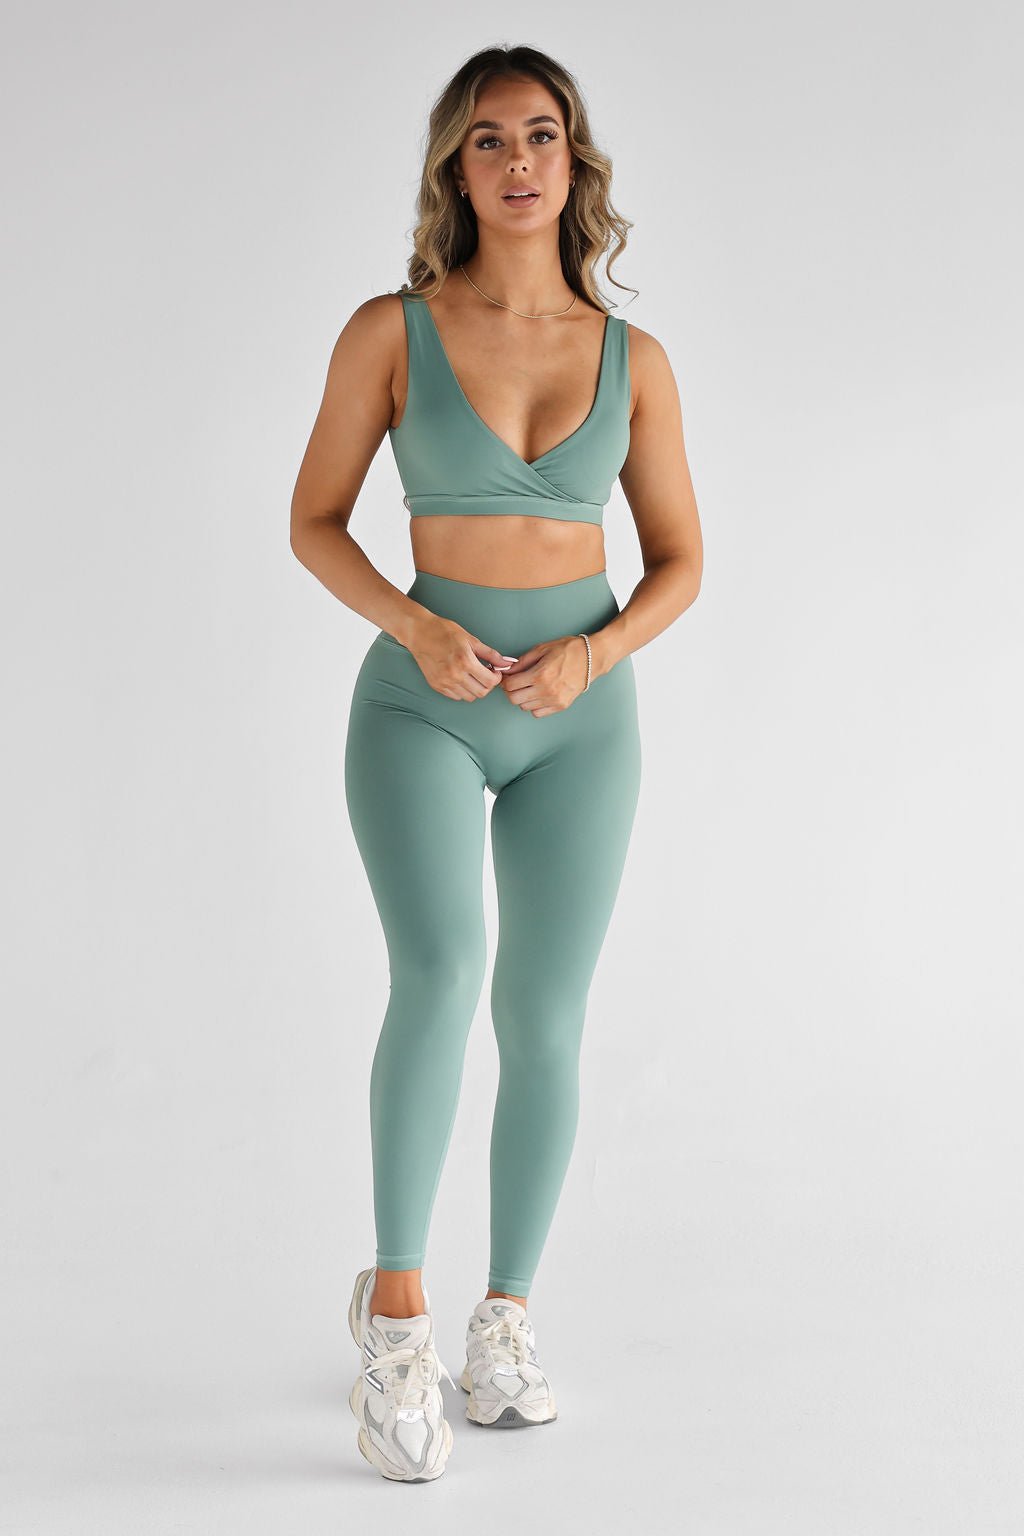 SCULPT Crop - Sage SHIPPING FROM 3/11 - LEELO ACTIVE